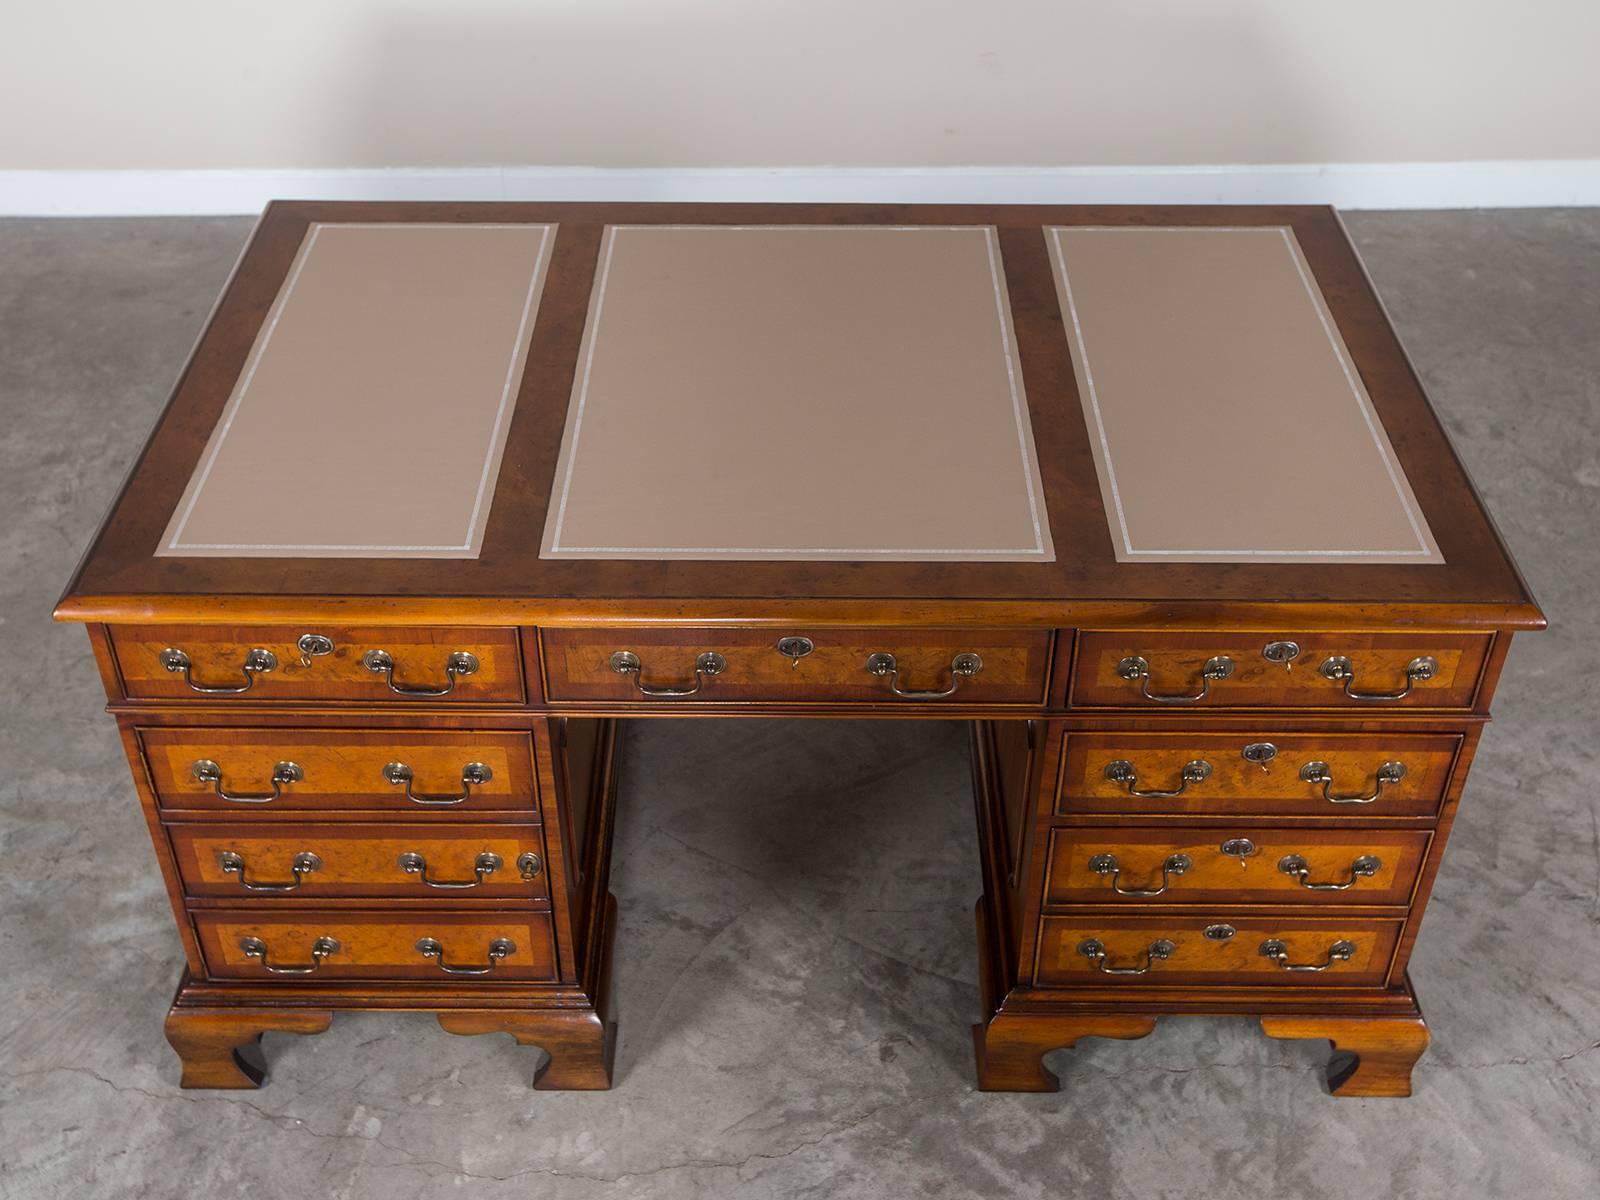 Receive our new selections direct from 1stdibs by email each week. Please click on “Follow Dealer” button below and see them first!

This handsome bespoke burl walnut partner's desk is hand made in England in the George III style with drawers and